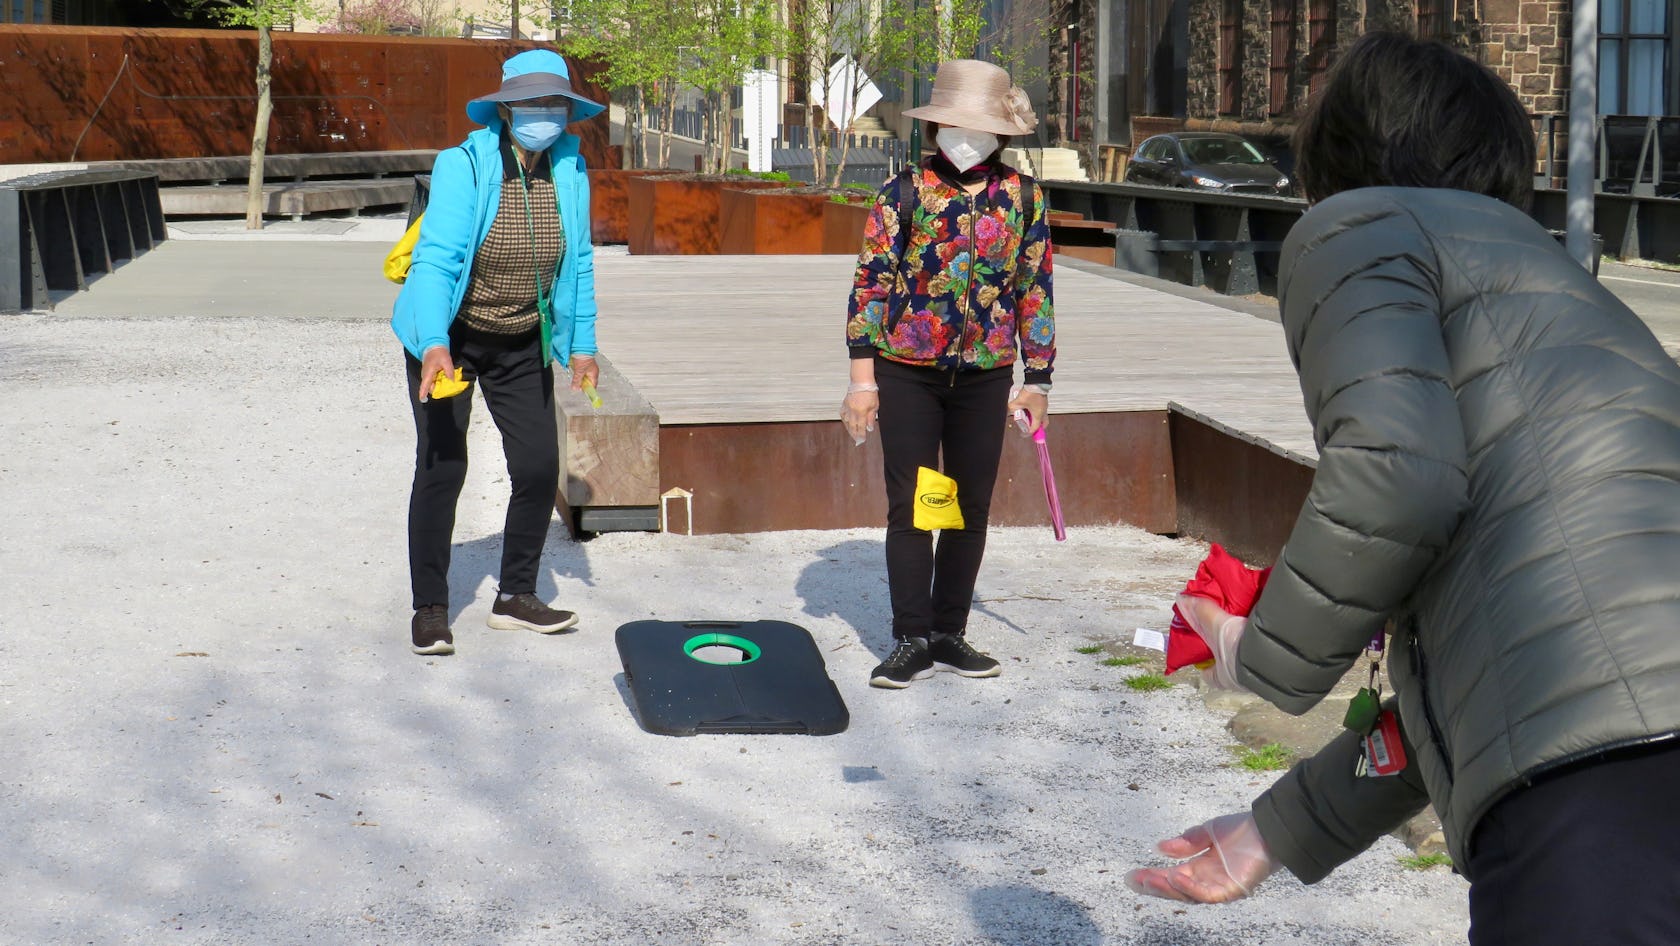 Three women play corn hole at Elder Hour - here they are tossing bean bags back and forth